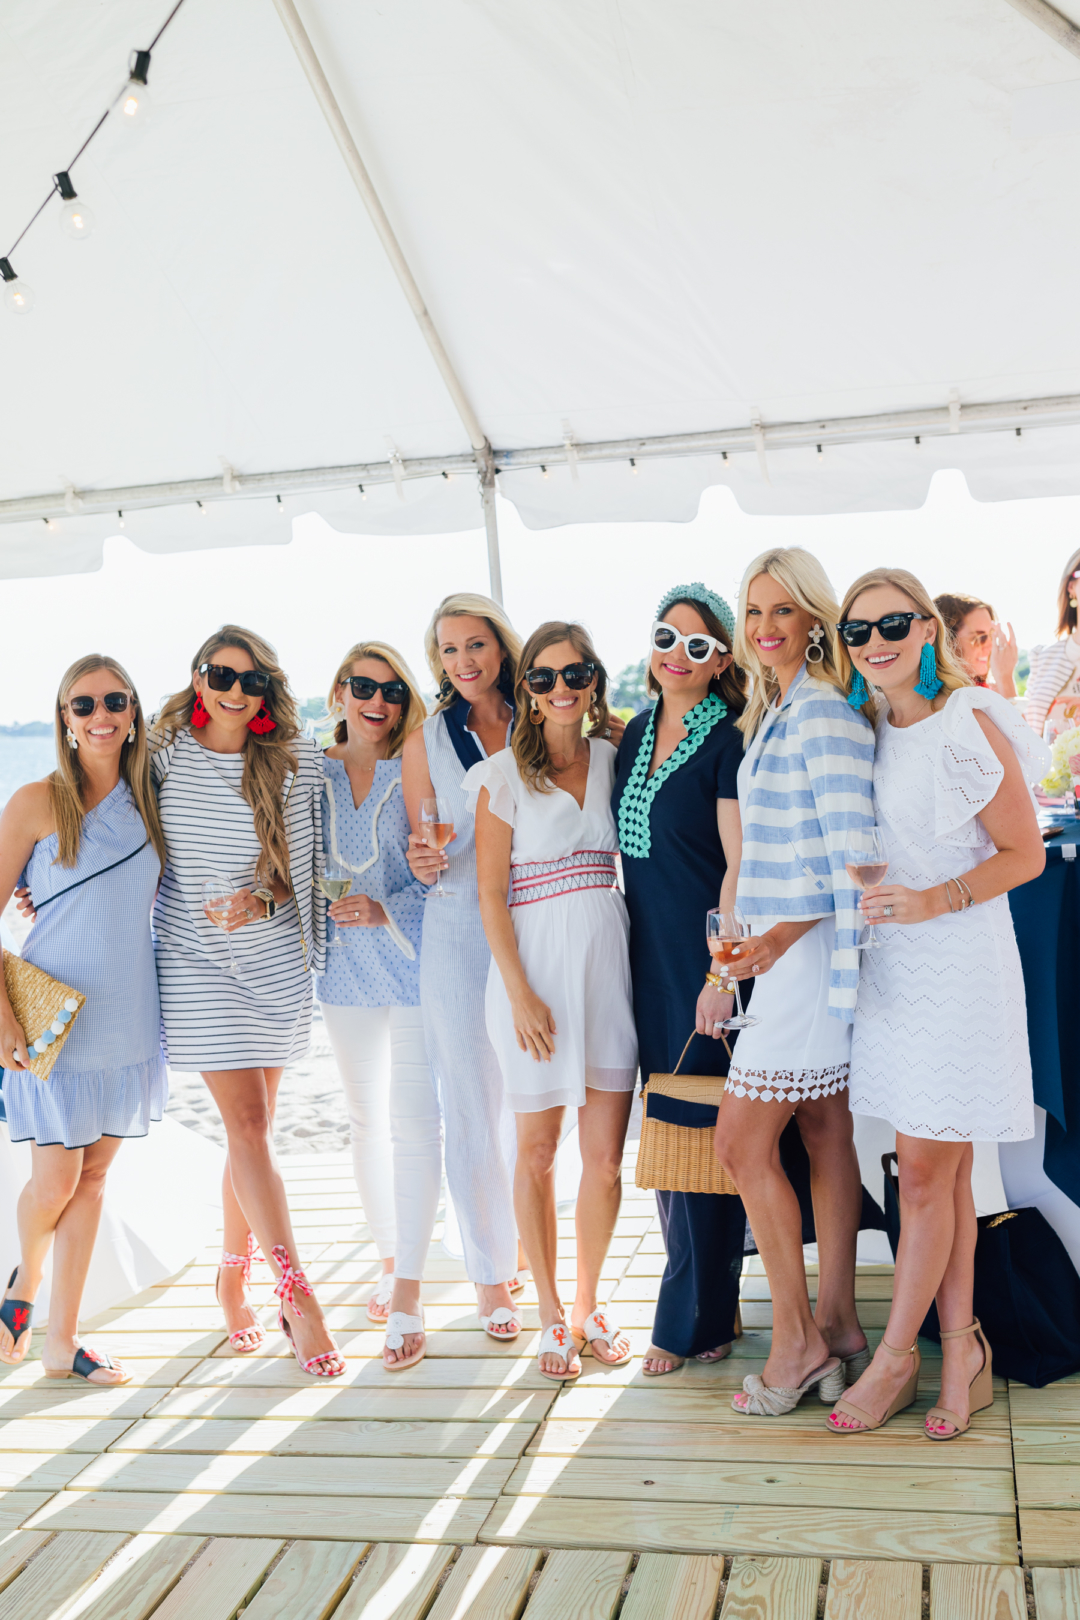 Fashion: Set Sail on Summer with Palm Beach Lately and Sail to Sable